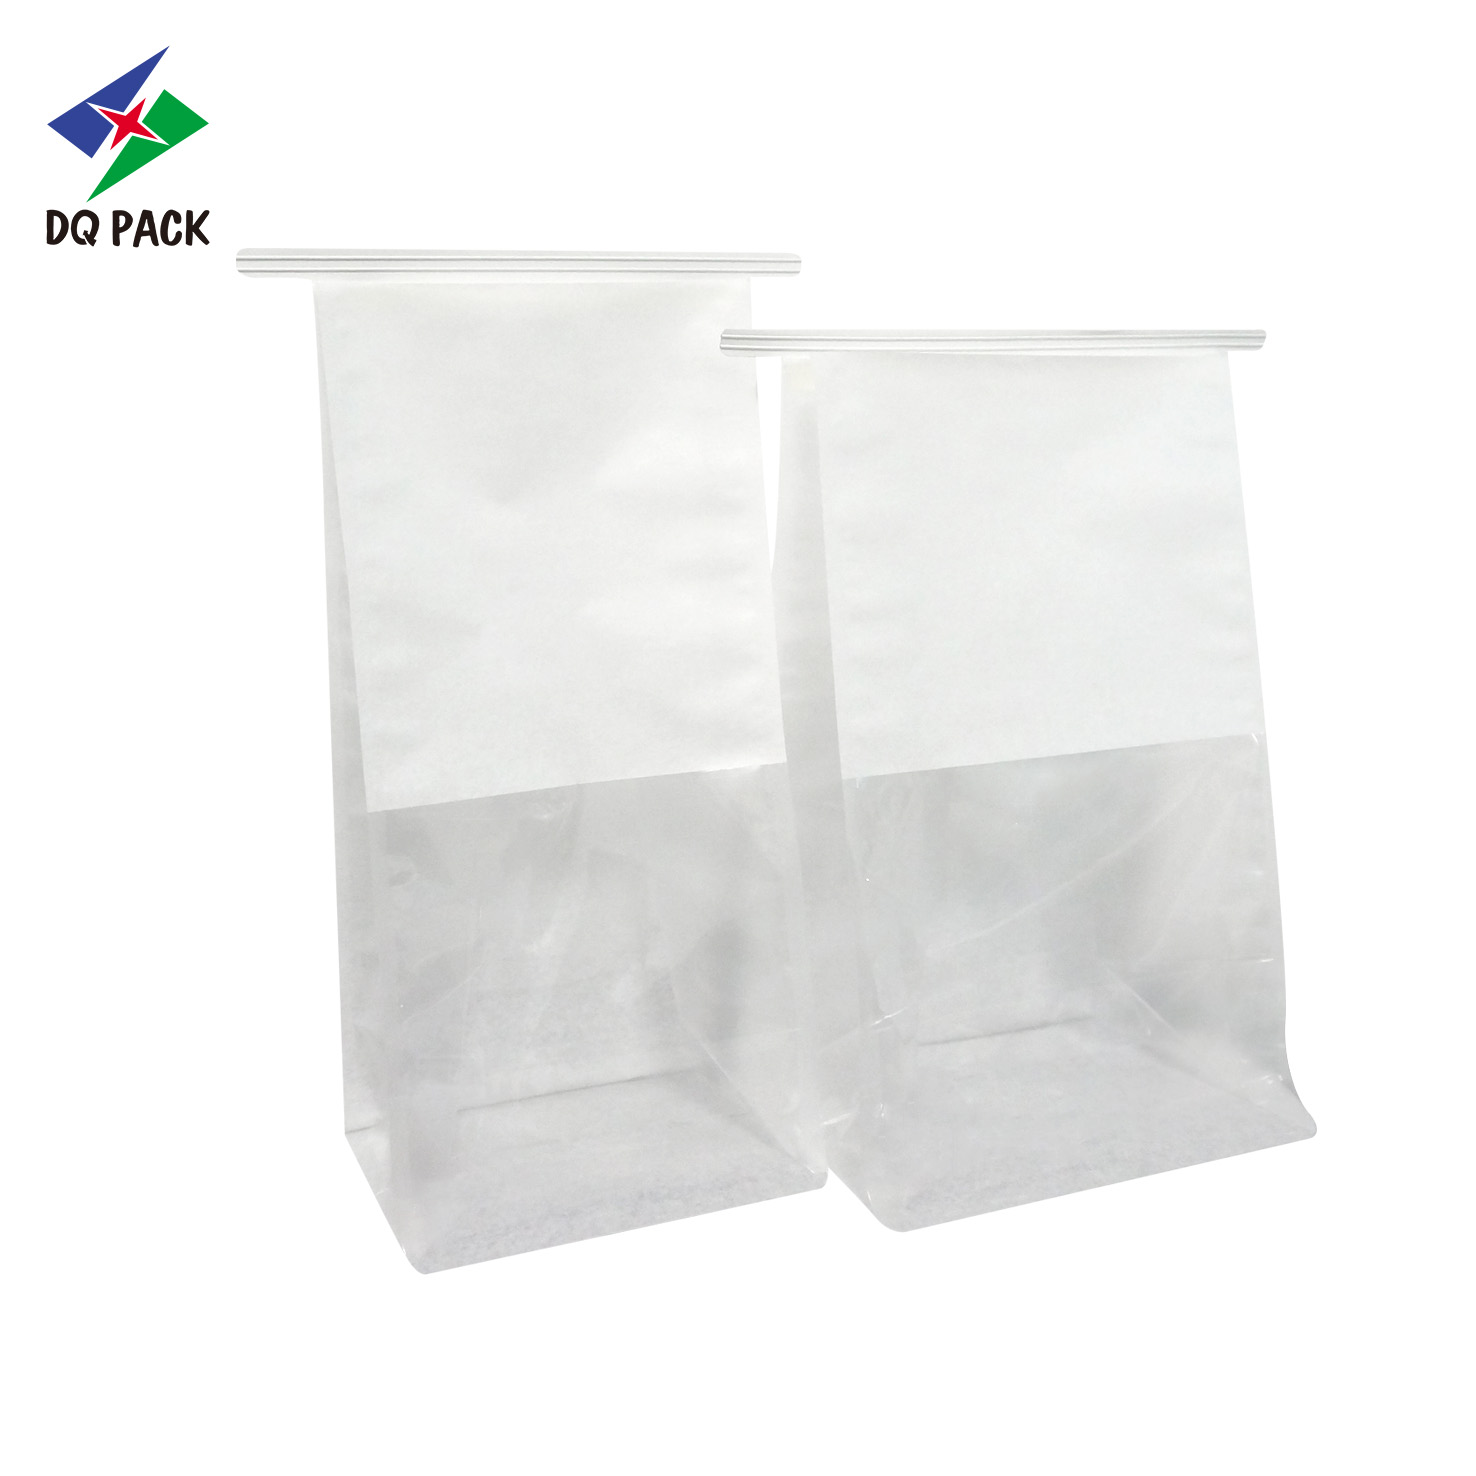 DQ PACK Chian Supplier Low MOQ Plastic Mylar Bag Resealable zip lock bag stand up pouch